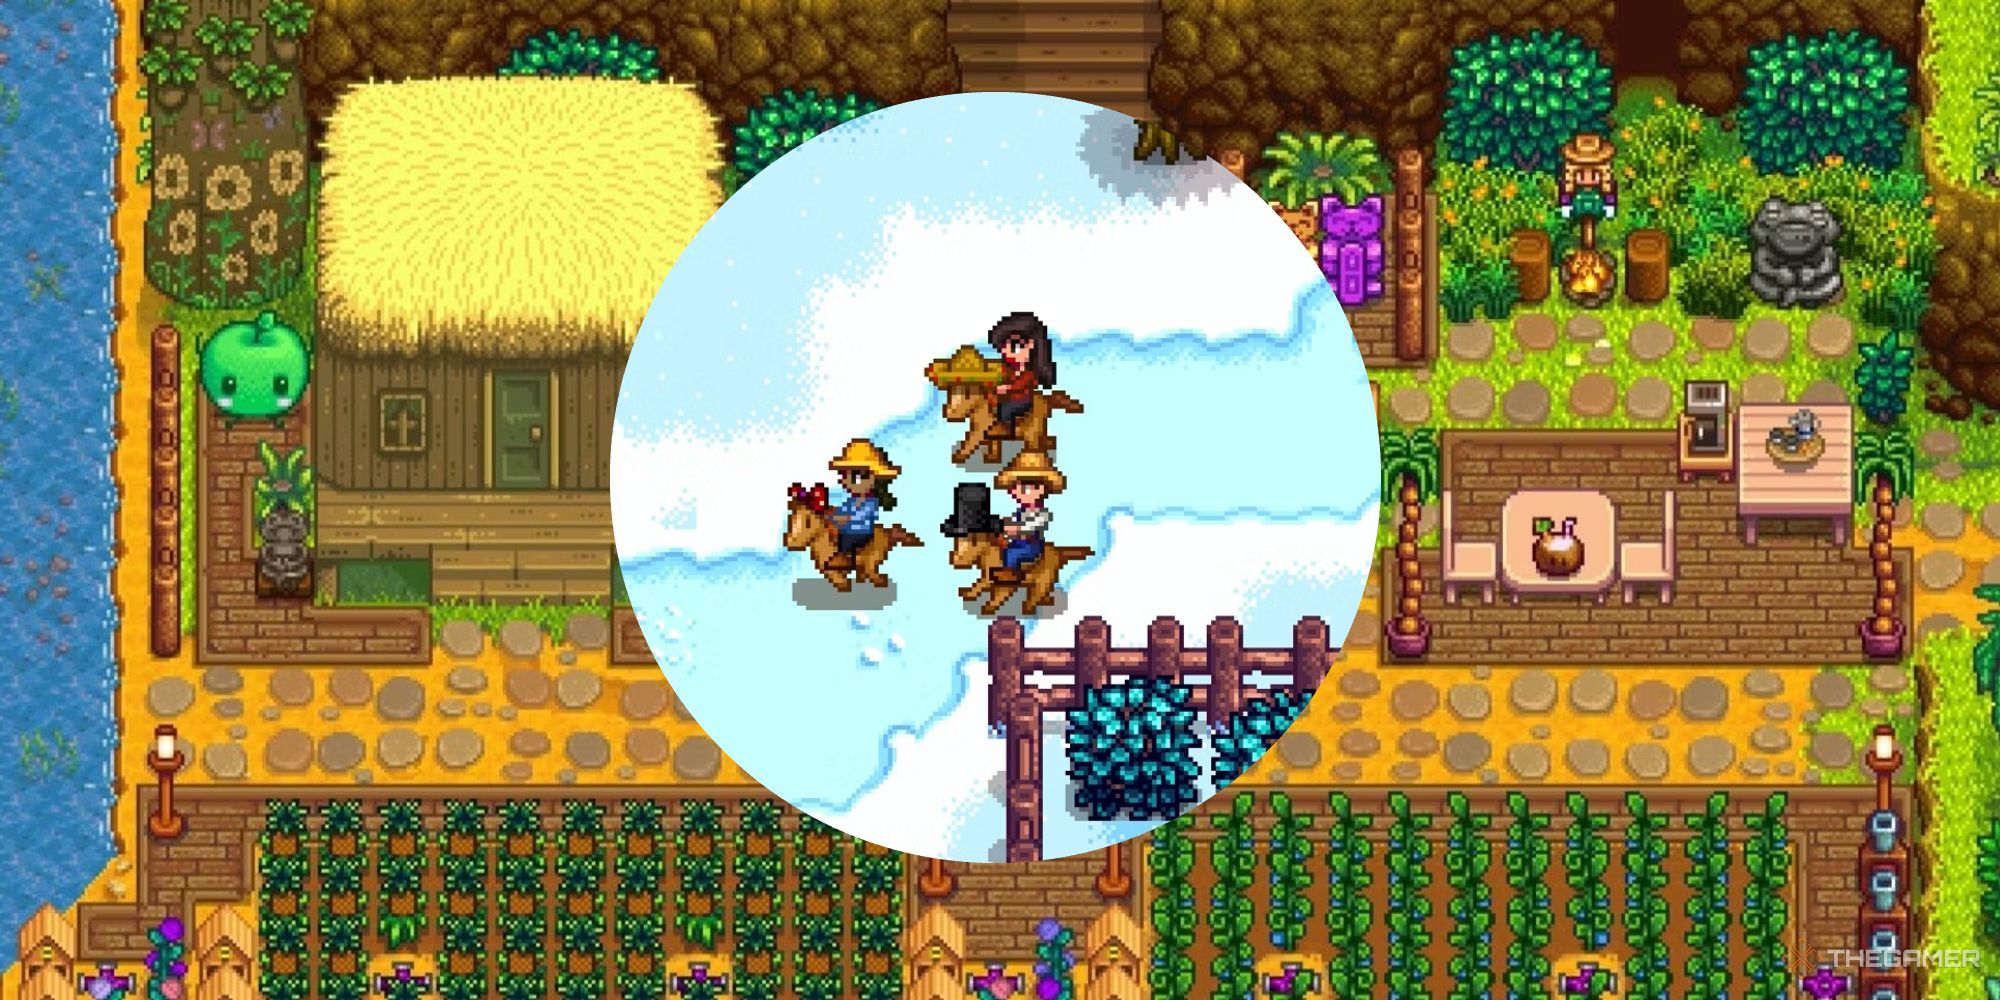 stardew valley circle with multiple players riding horses over image of ginger island farm